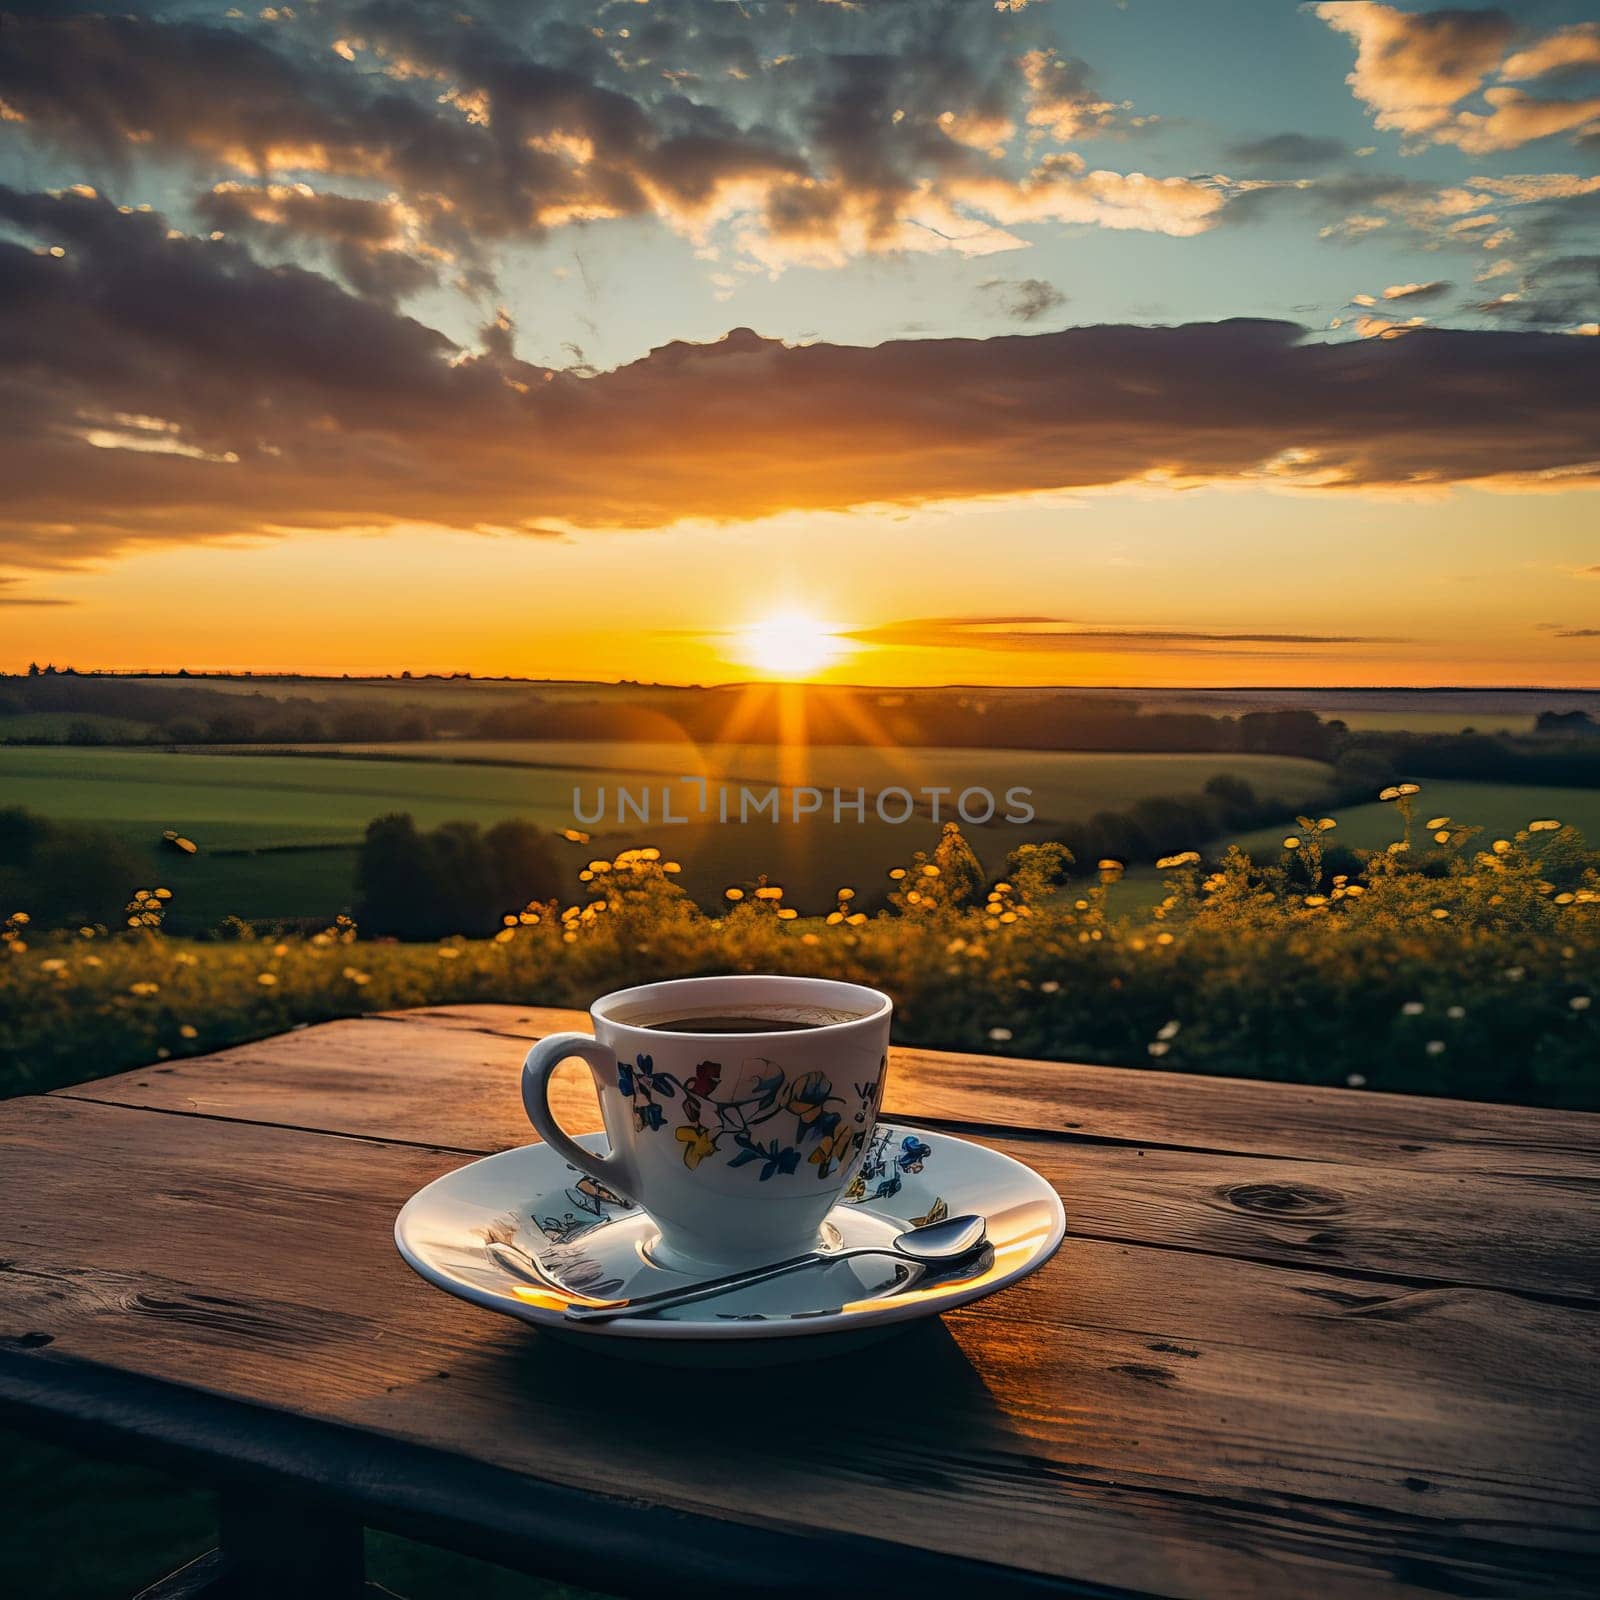 A cup of coffee on a table in front of a field with at sunset. Ai art